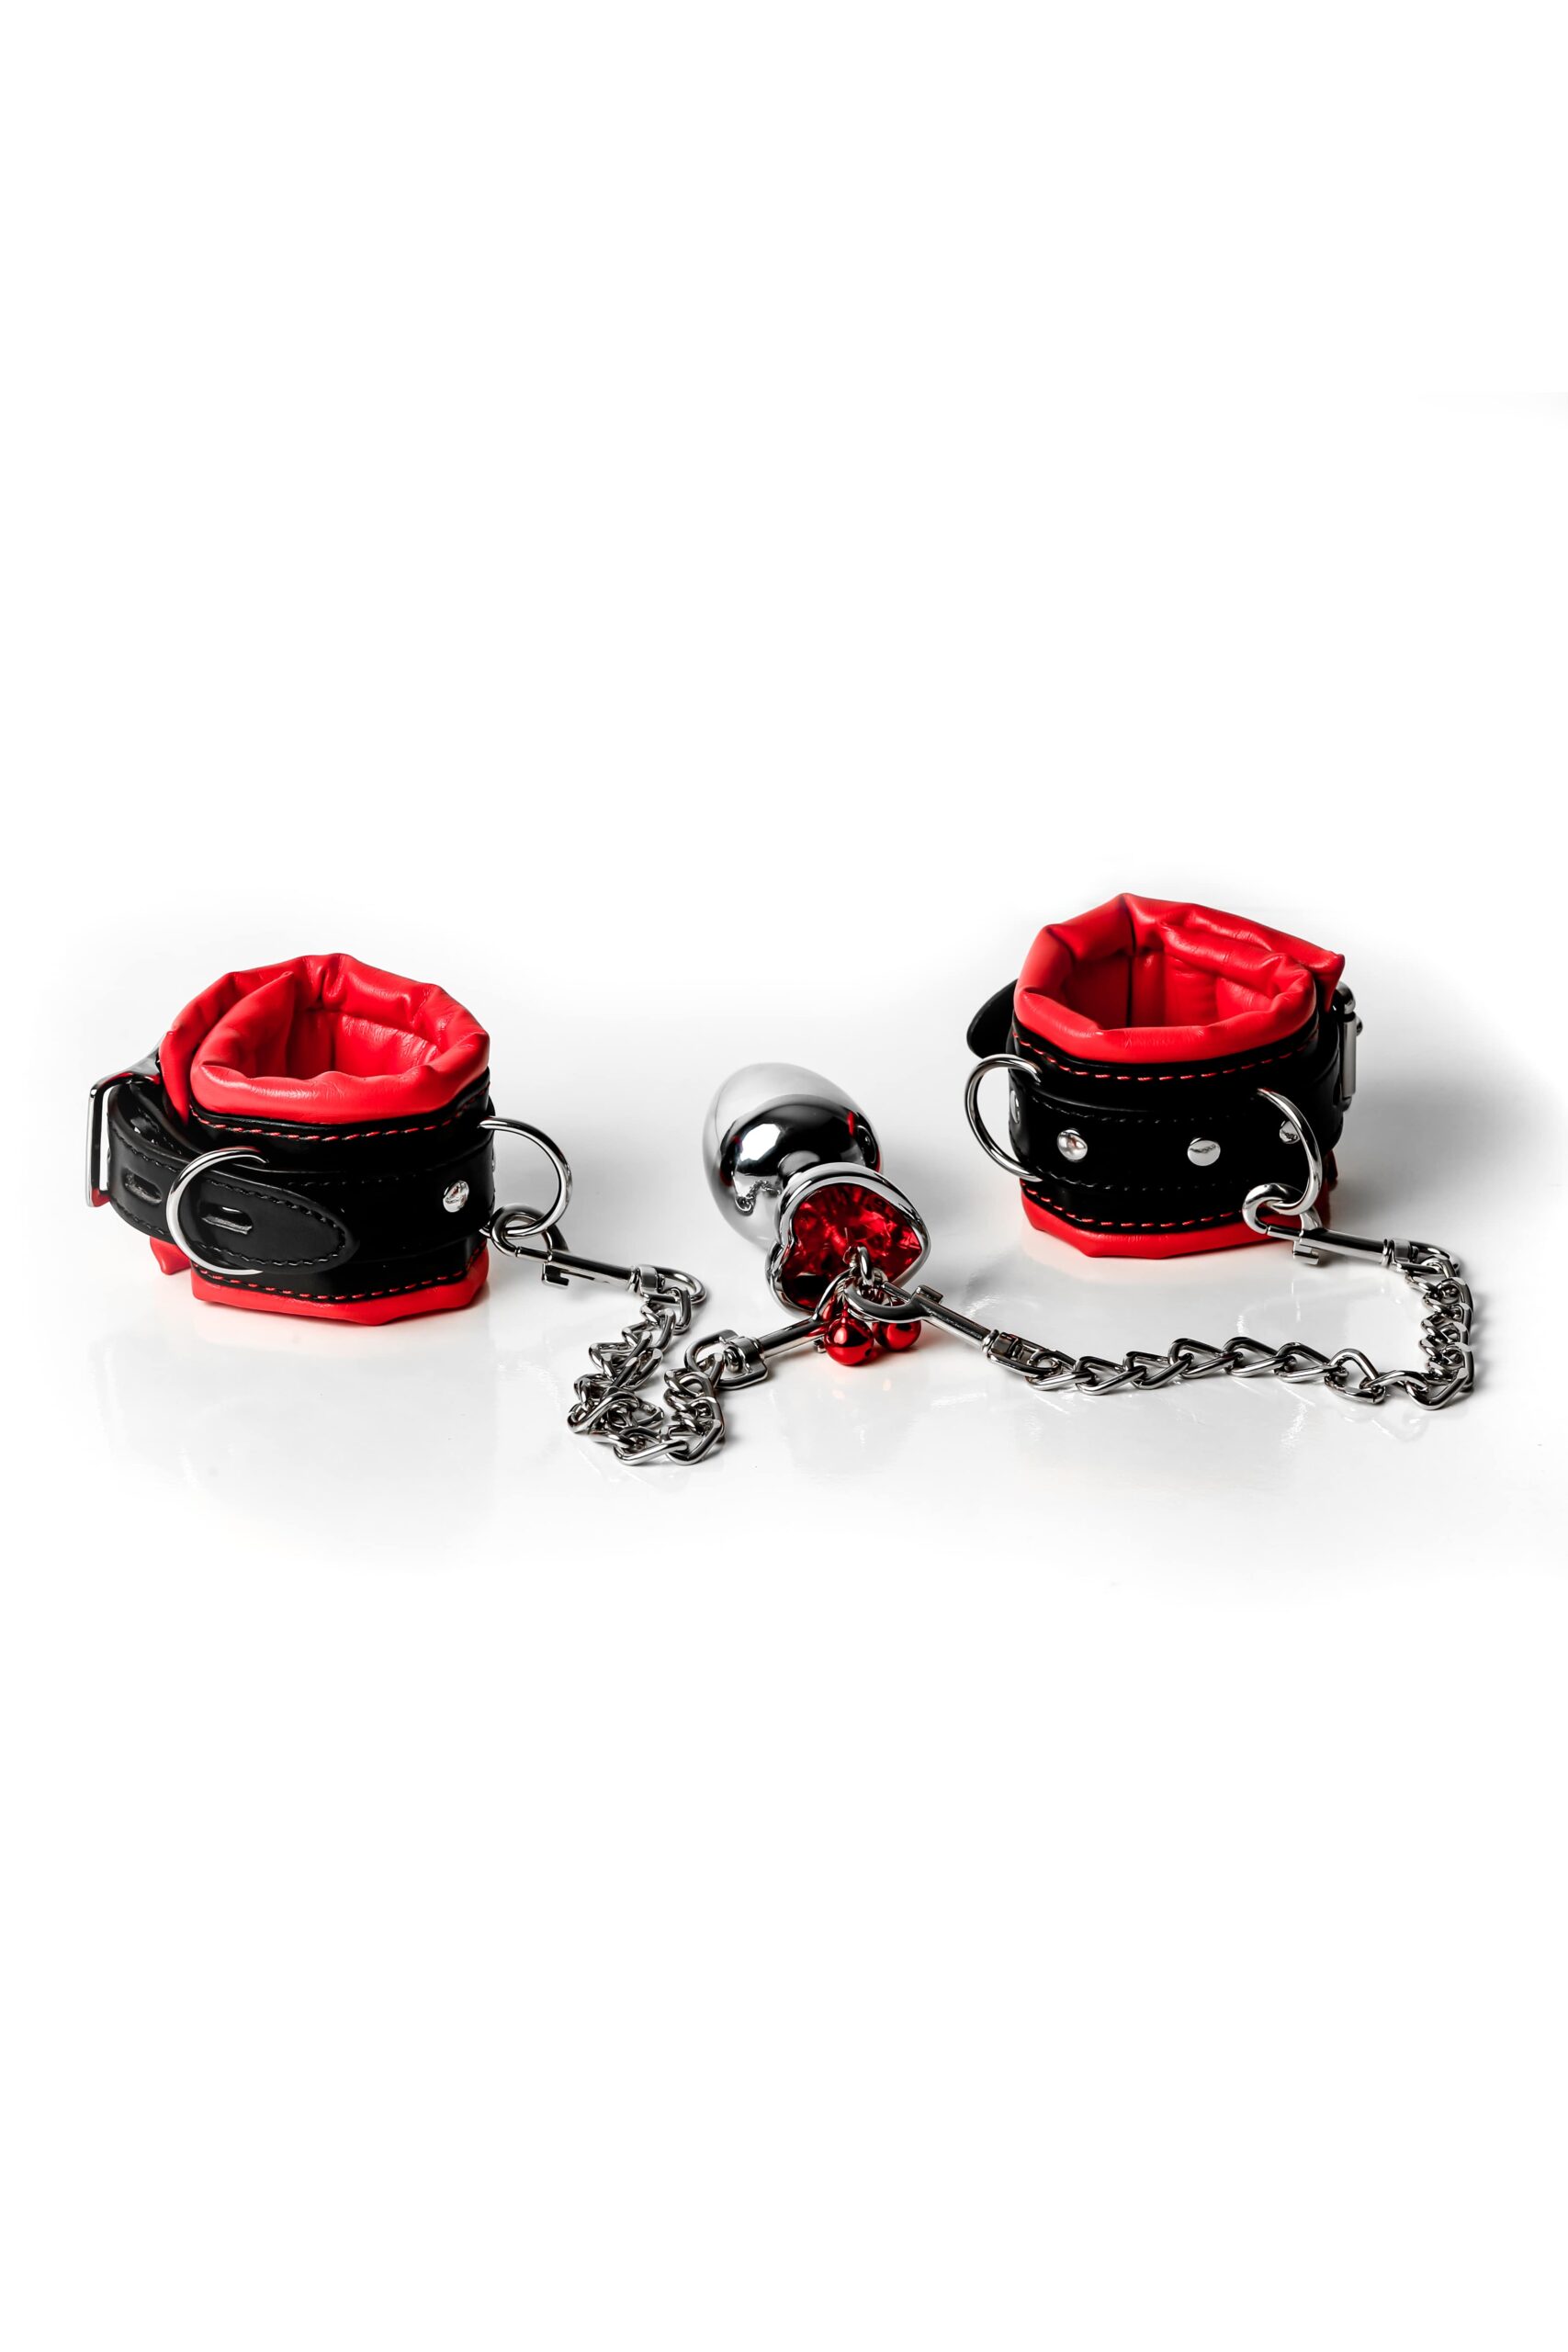 Leather bdsm sex handcuffs and butt plug. Erotic restraint accessory set, padded wrist cuffs and anal kinky toy. Sexy bondage fetish gift. Truhani